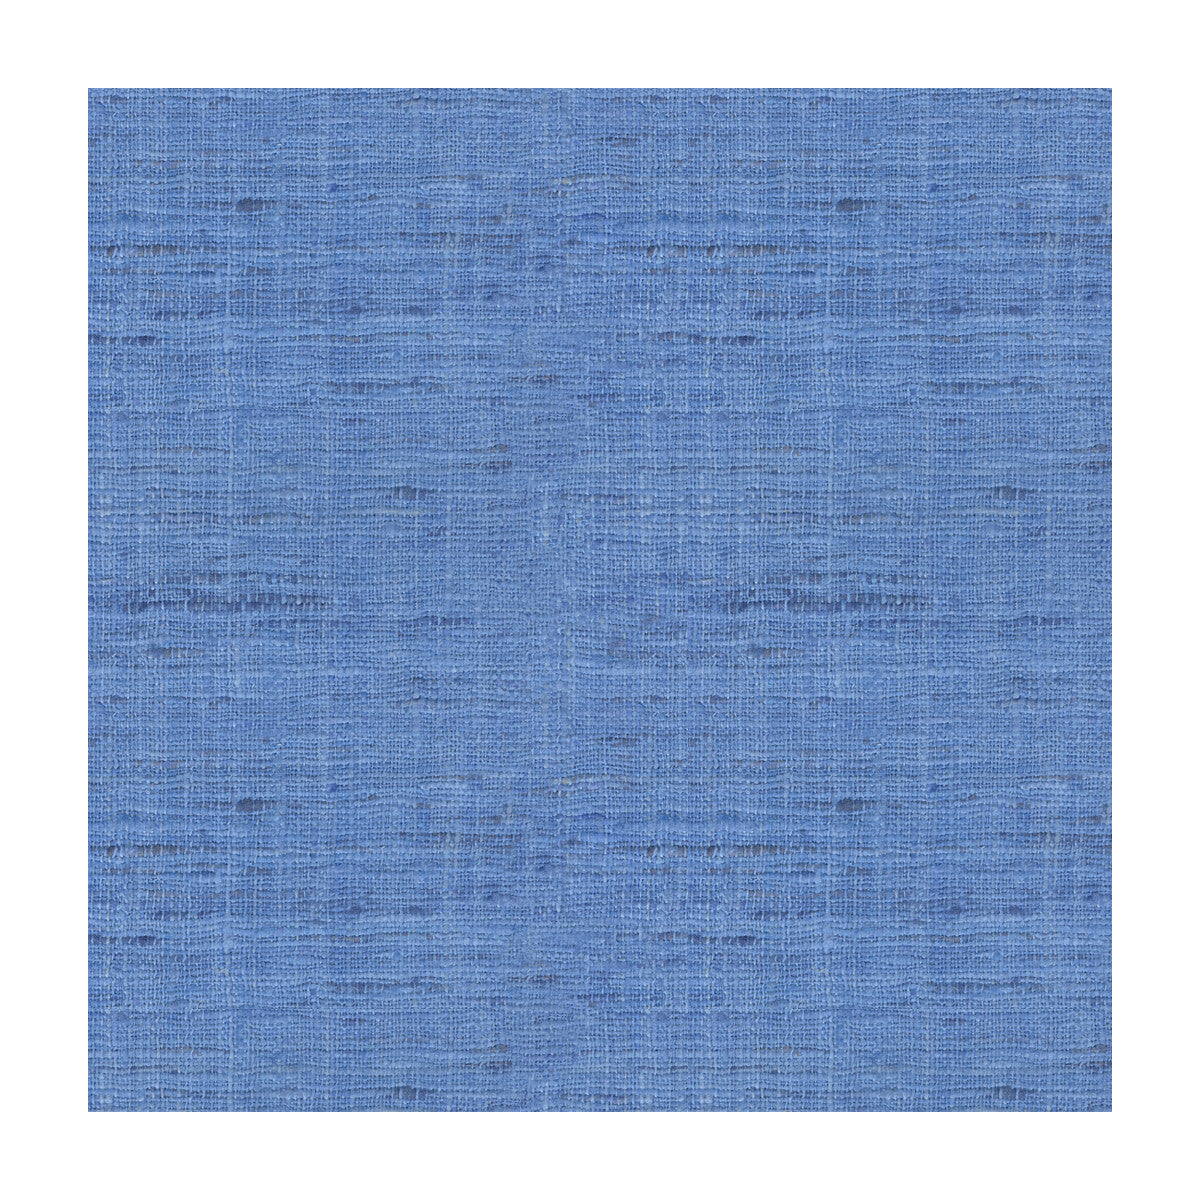 Sonoma fabric in cornflower color - pattern GWF-3109.510.0 - by Lee Jofa Modern in the Kelly Wearstler II collection